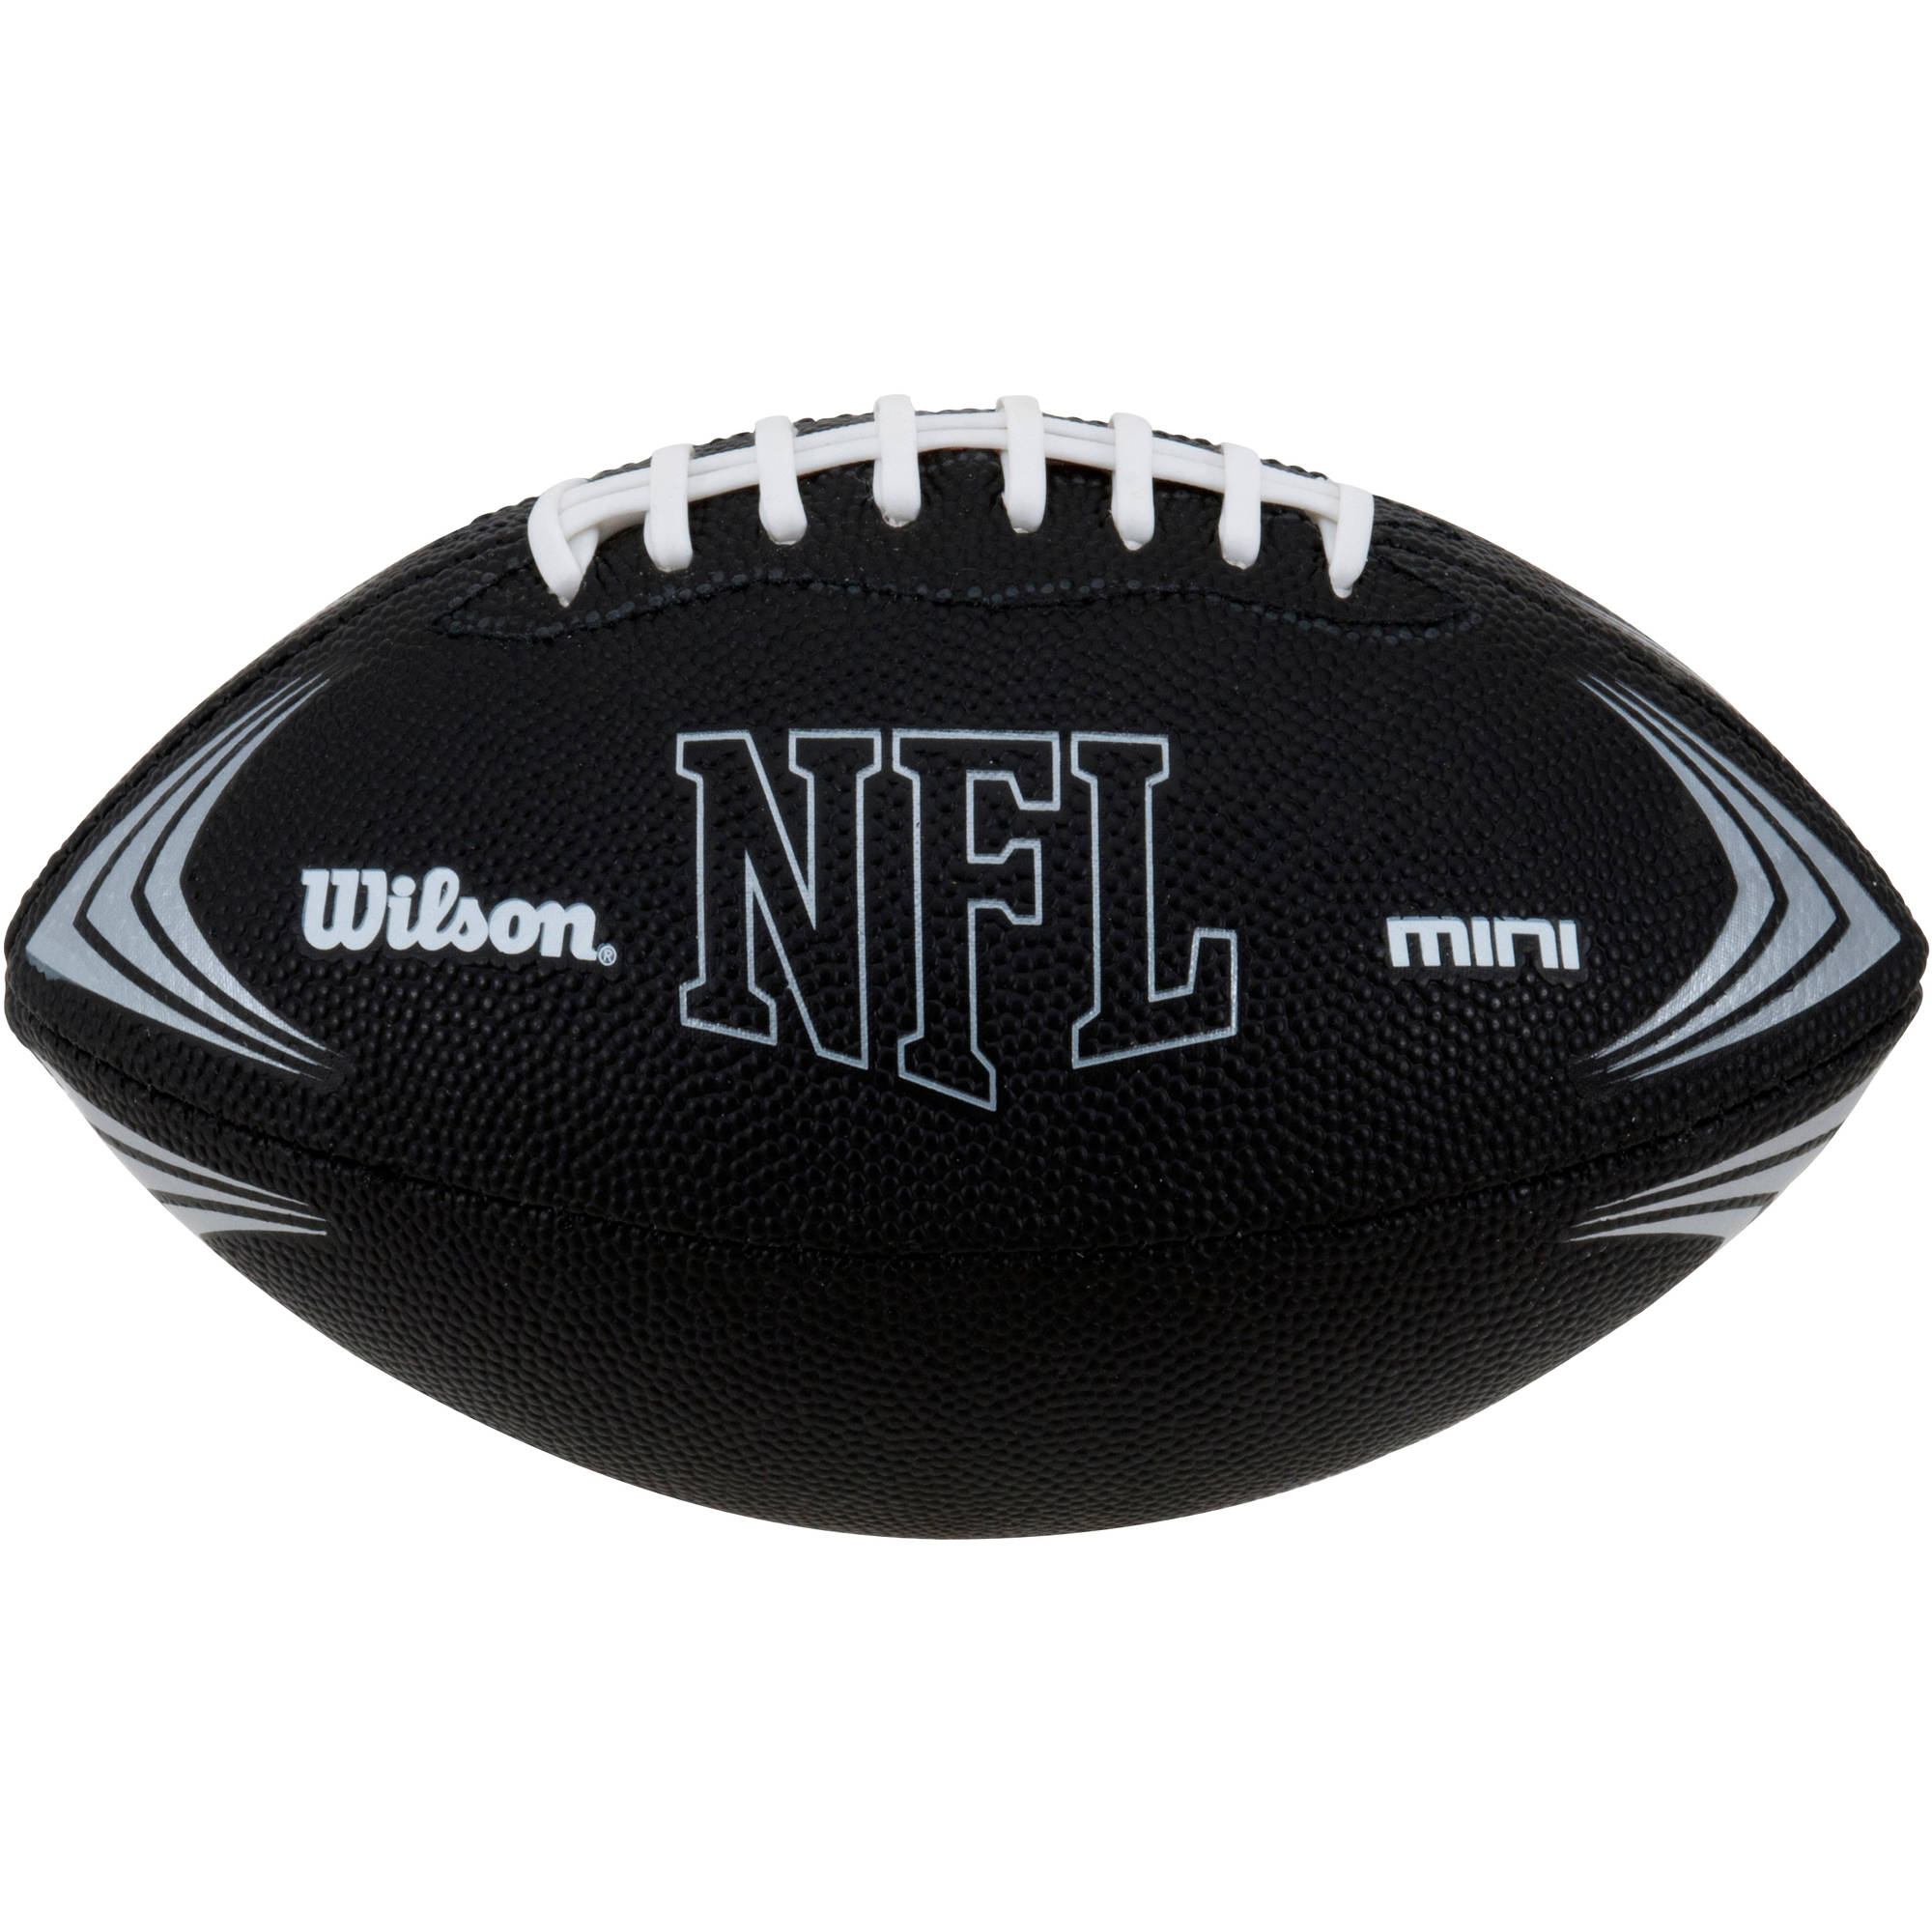 Wilson Sporting Goods NFL Mini Rubber Youth Football, Black - image 1 of 3